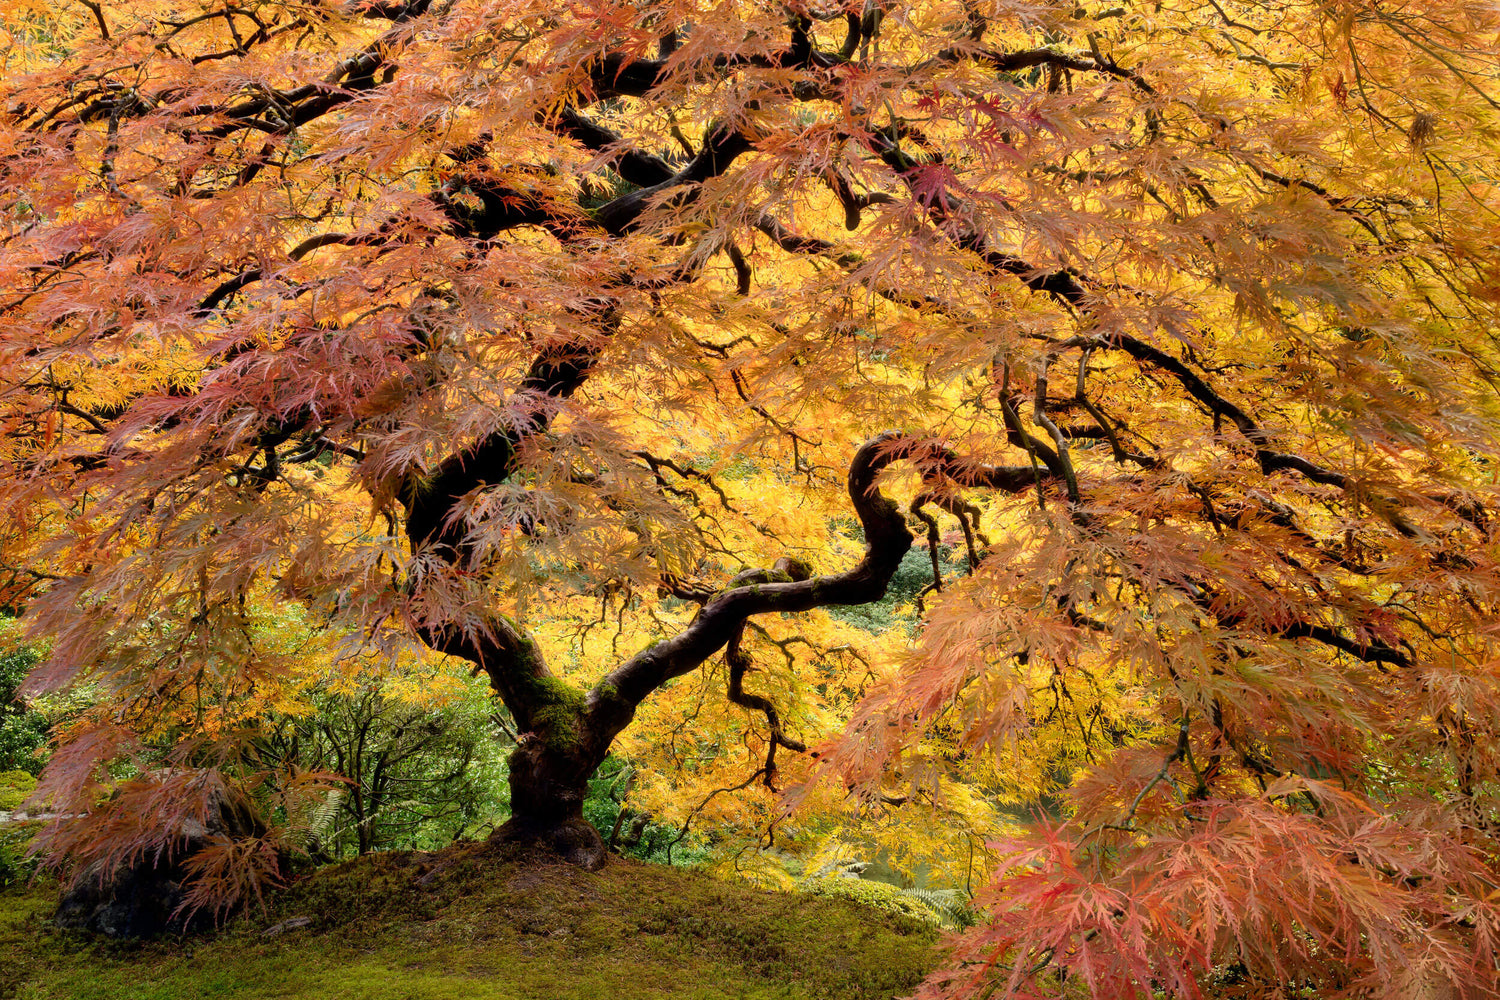 A Japanese maple picture from the Portland Japanese Garden in fall.